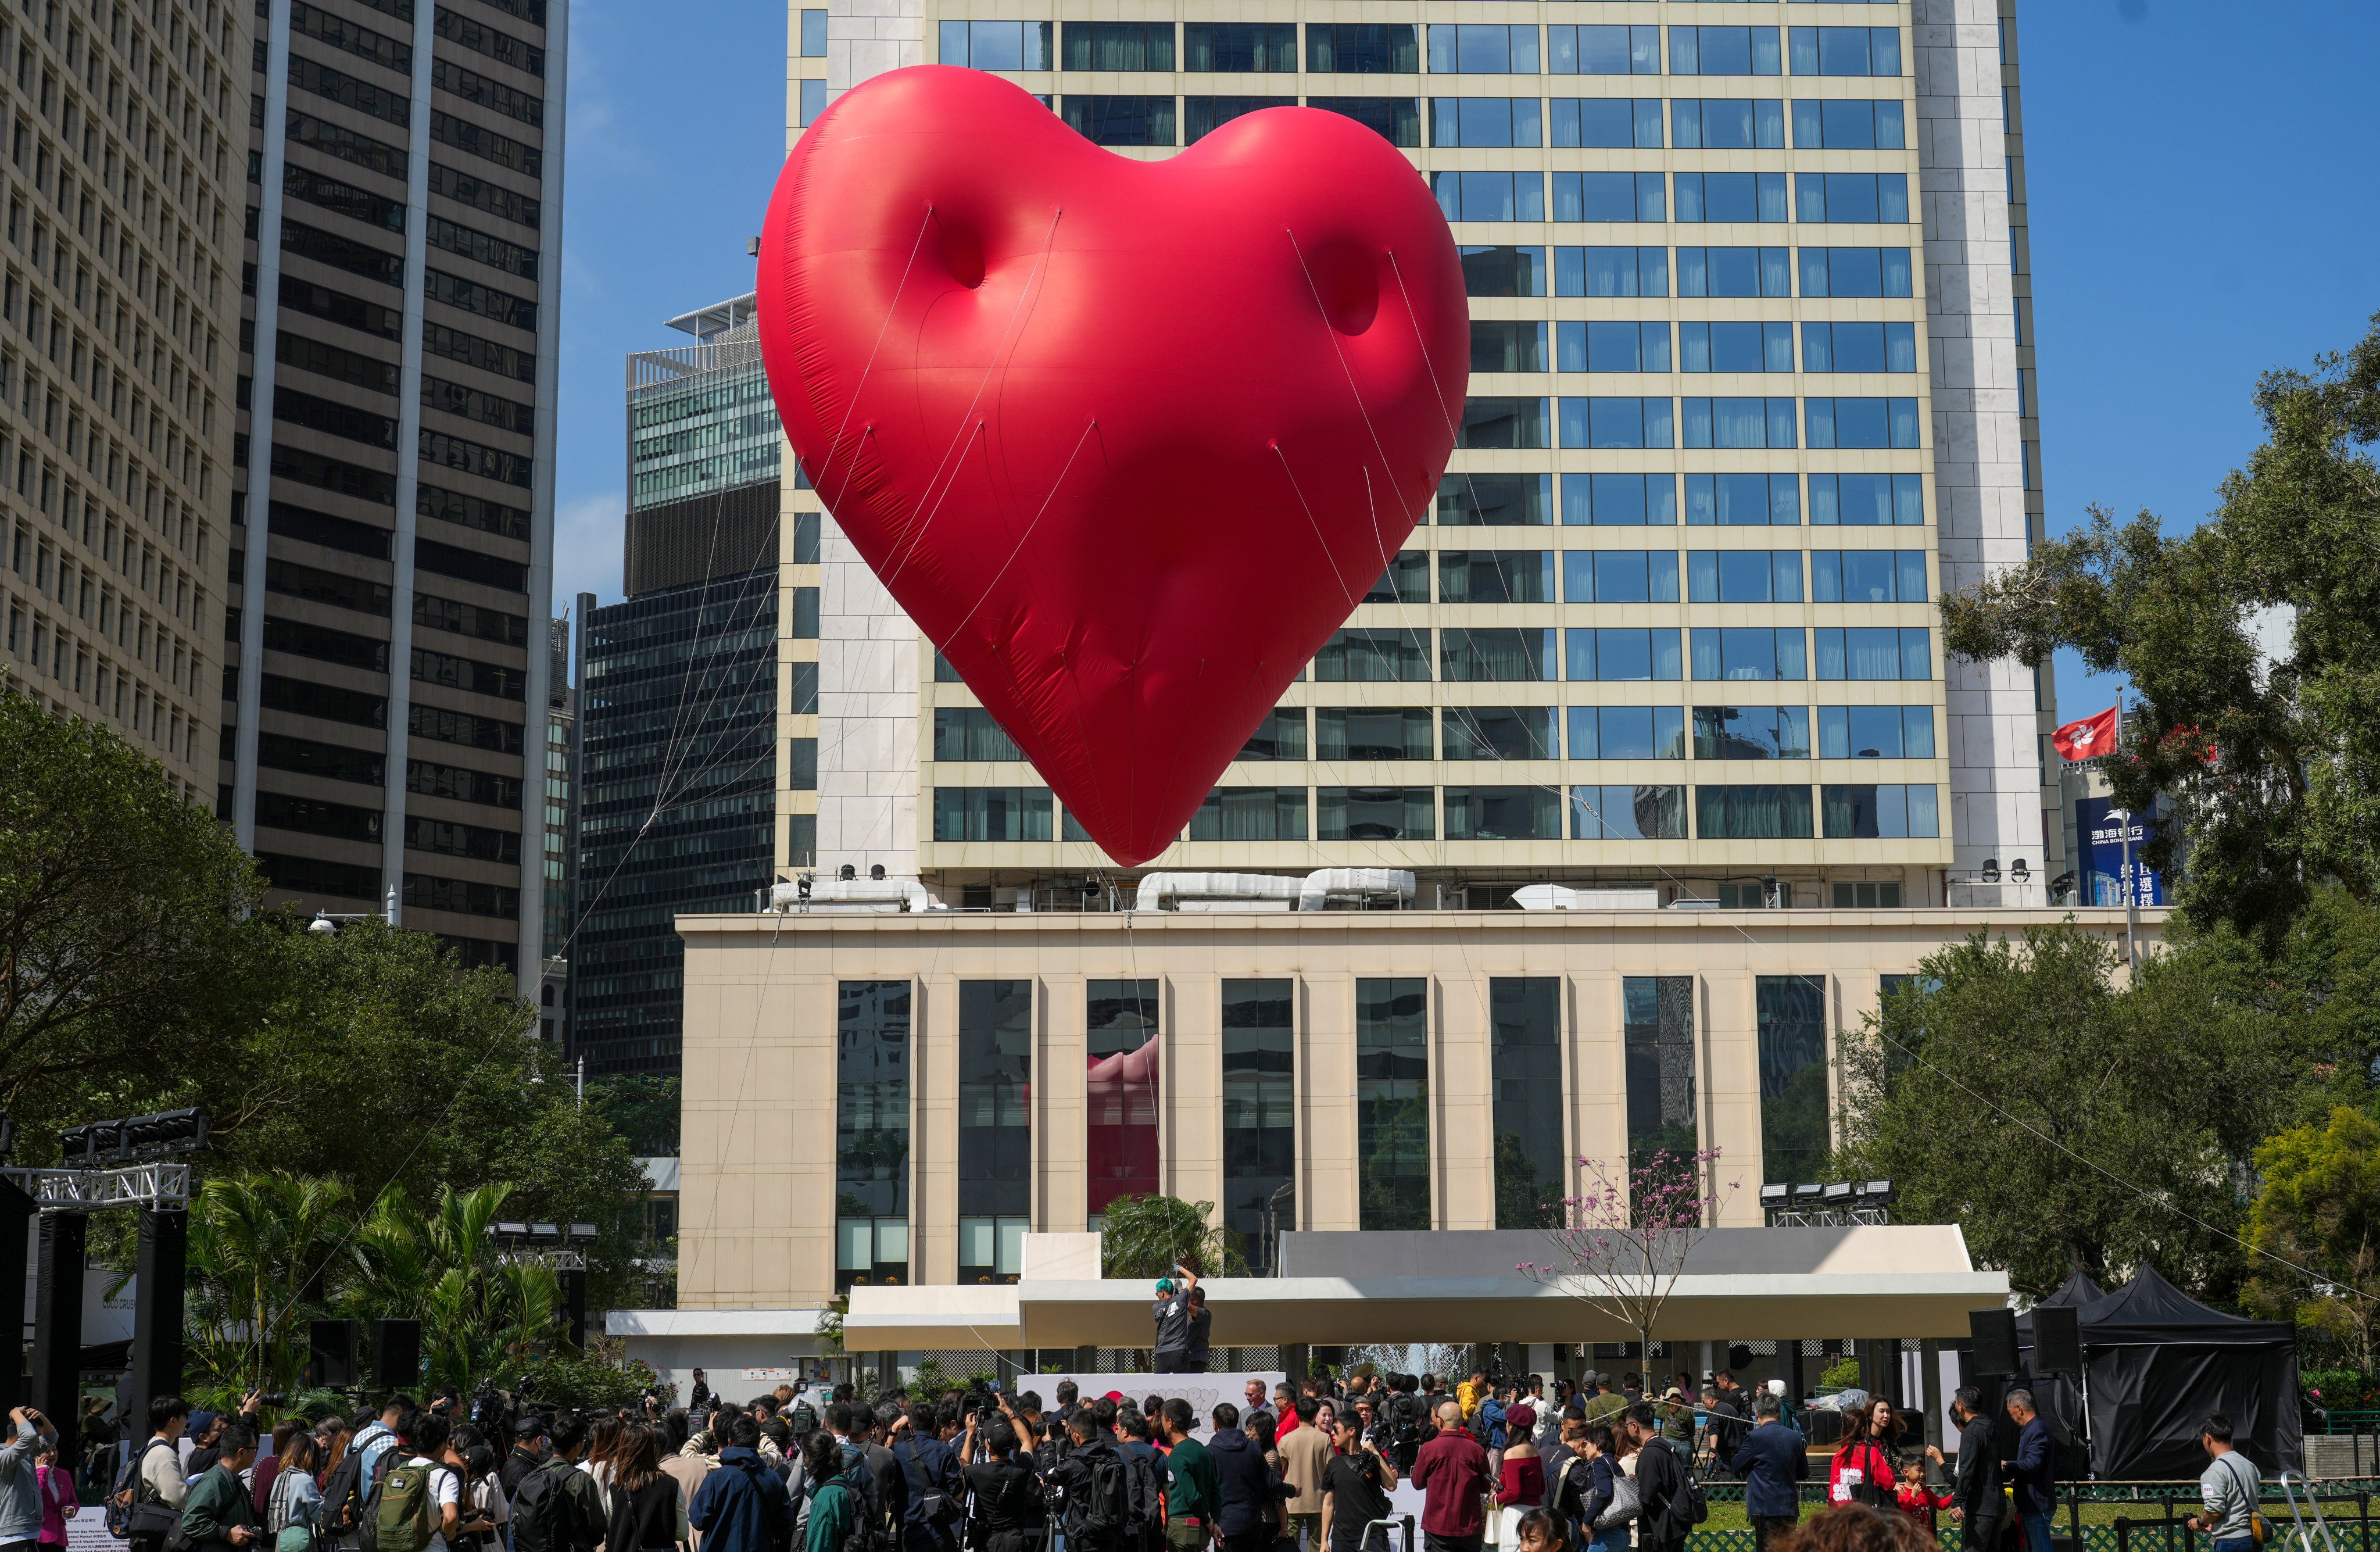 A massive “Chubby Heart” on display in Central’s Statue Square. Photo: Sam Tsang